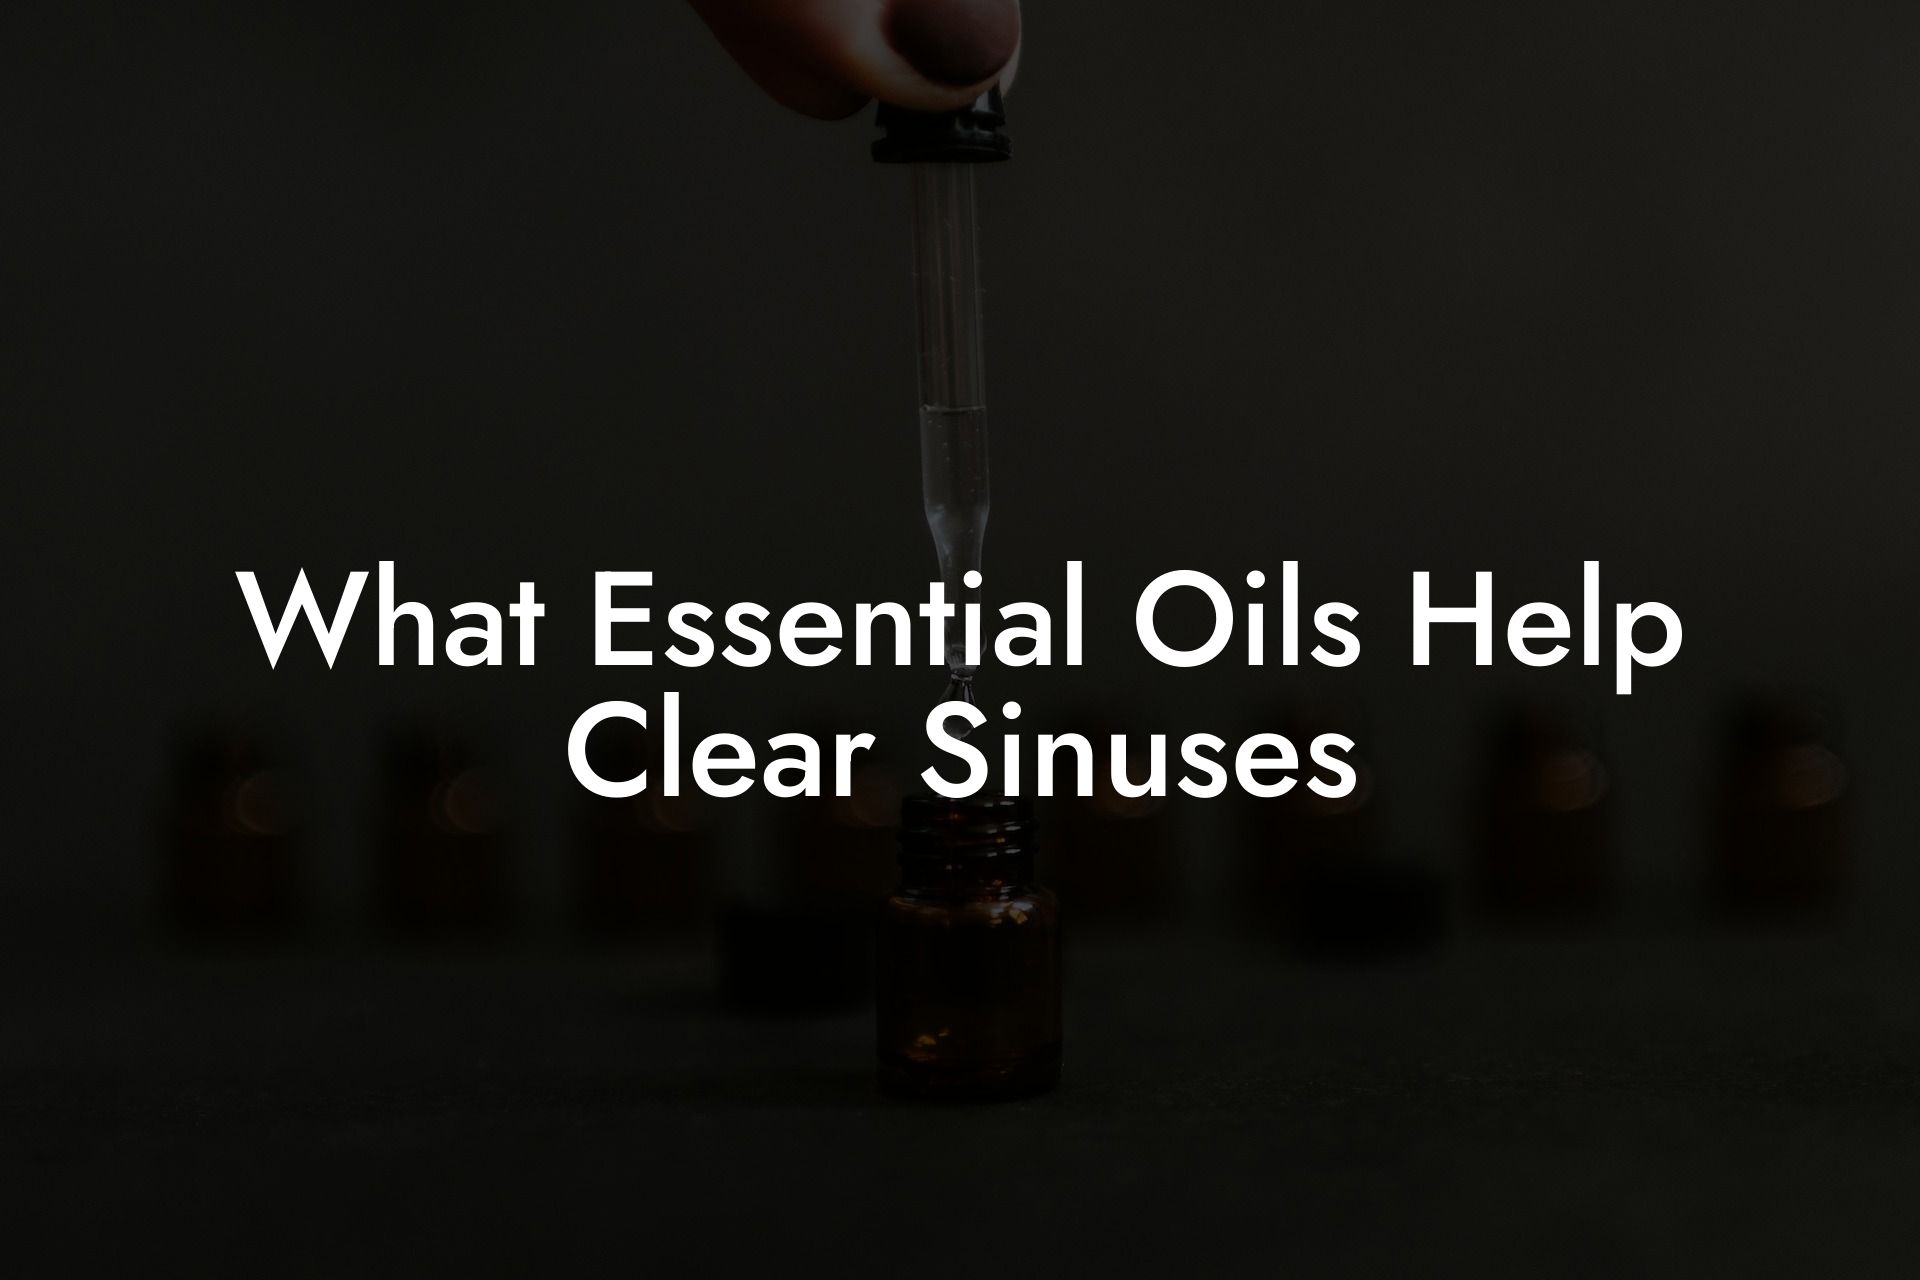 What Essential Oils Help Clear Sinuses